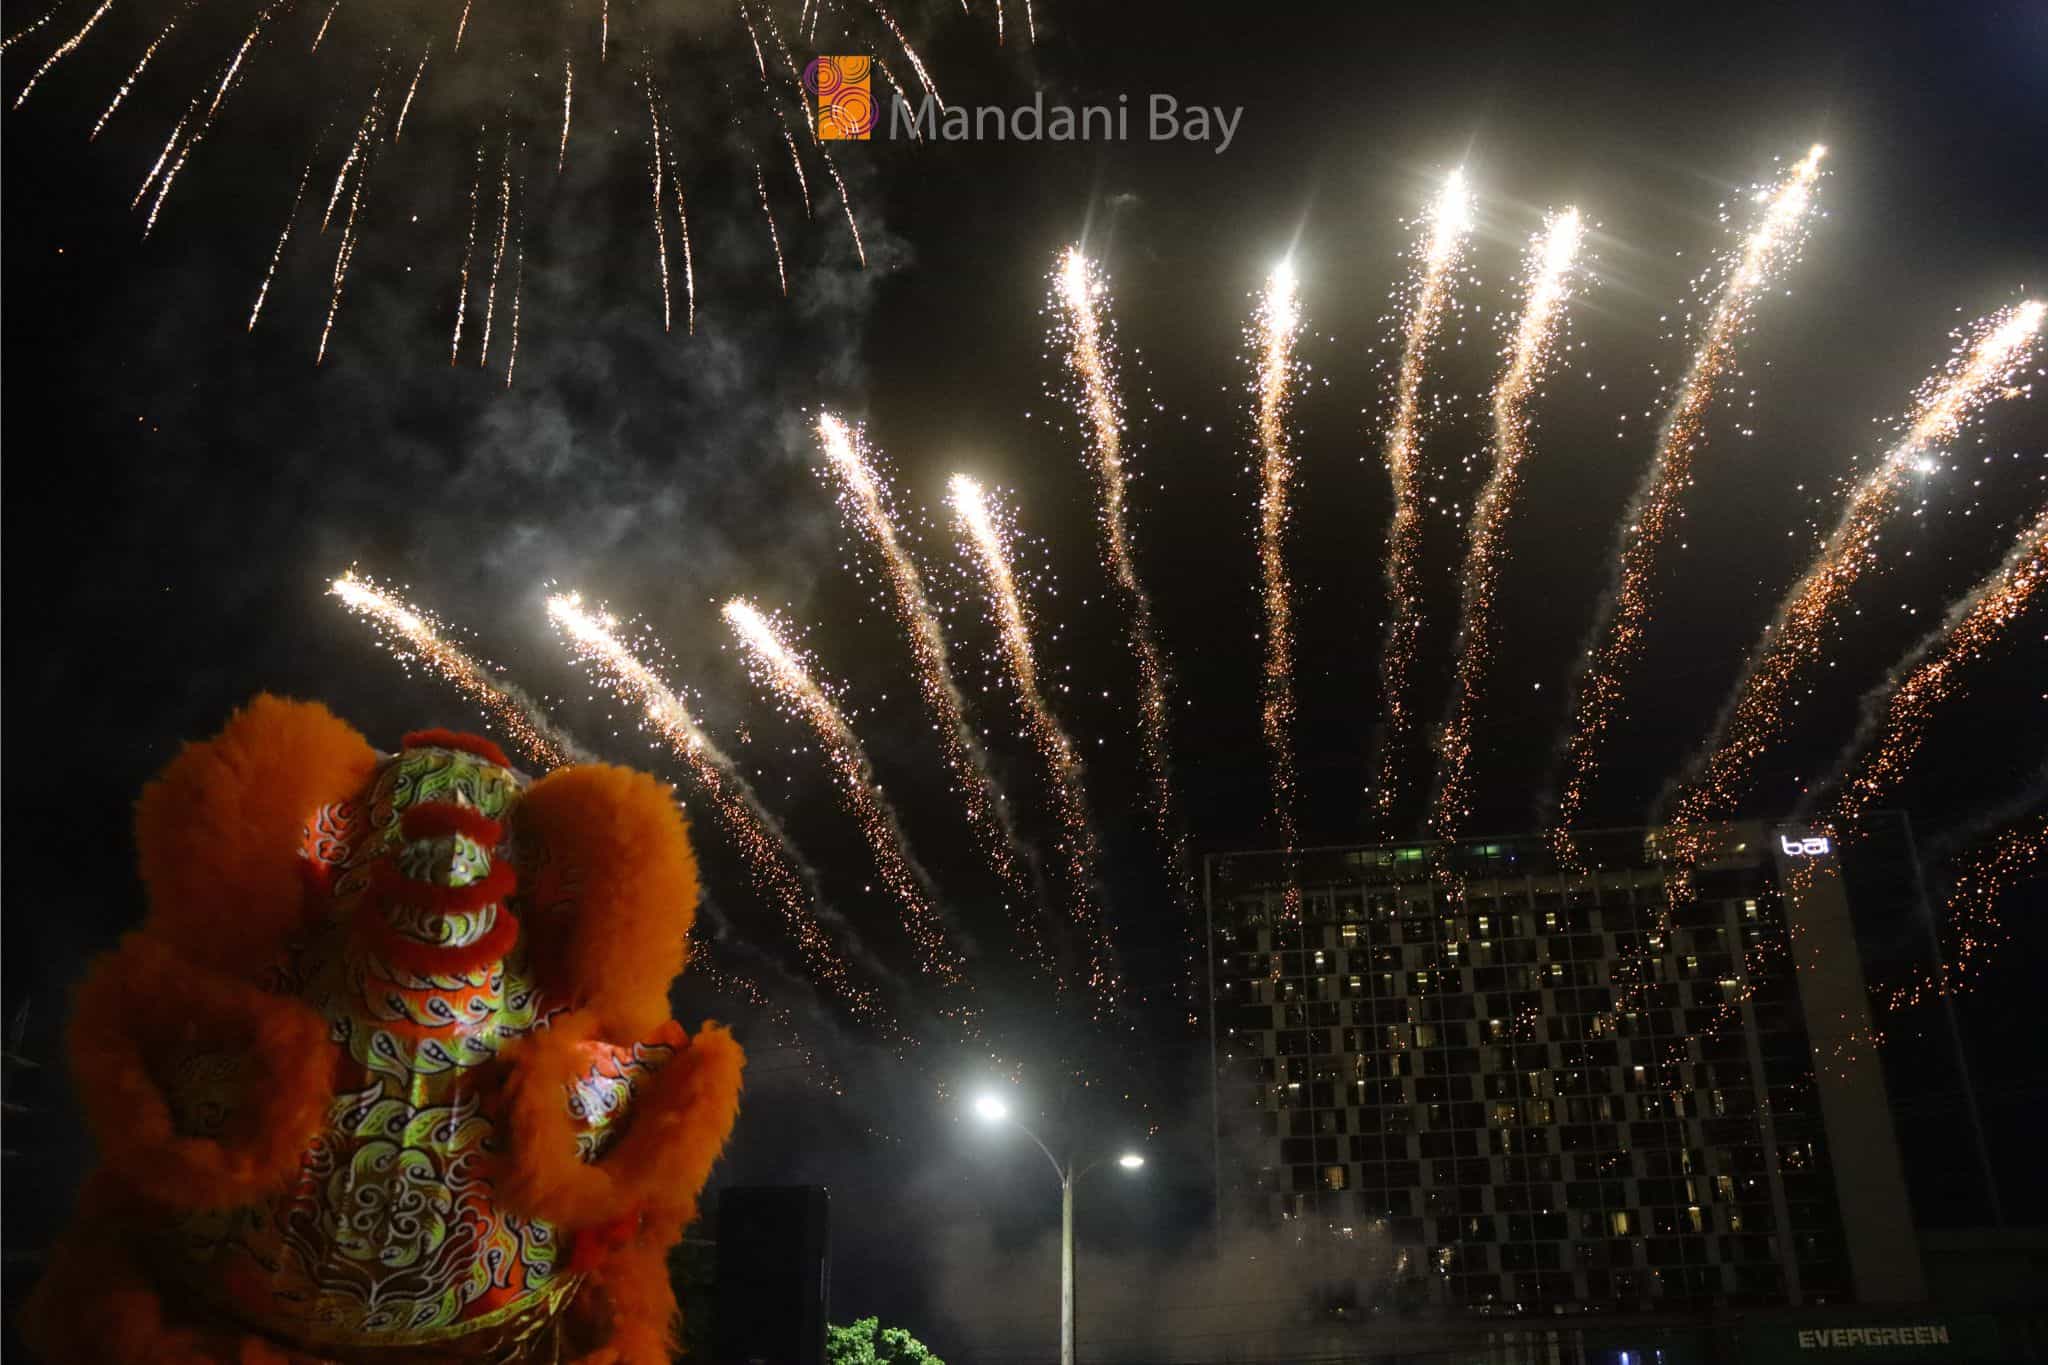 Chinese dragon with fireworks in background